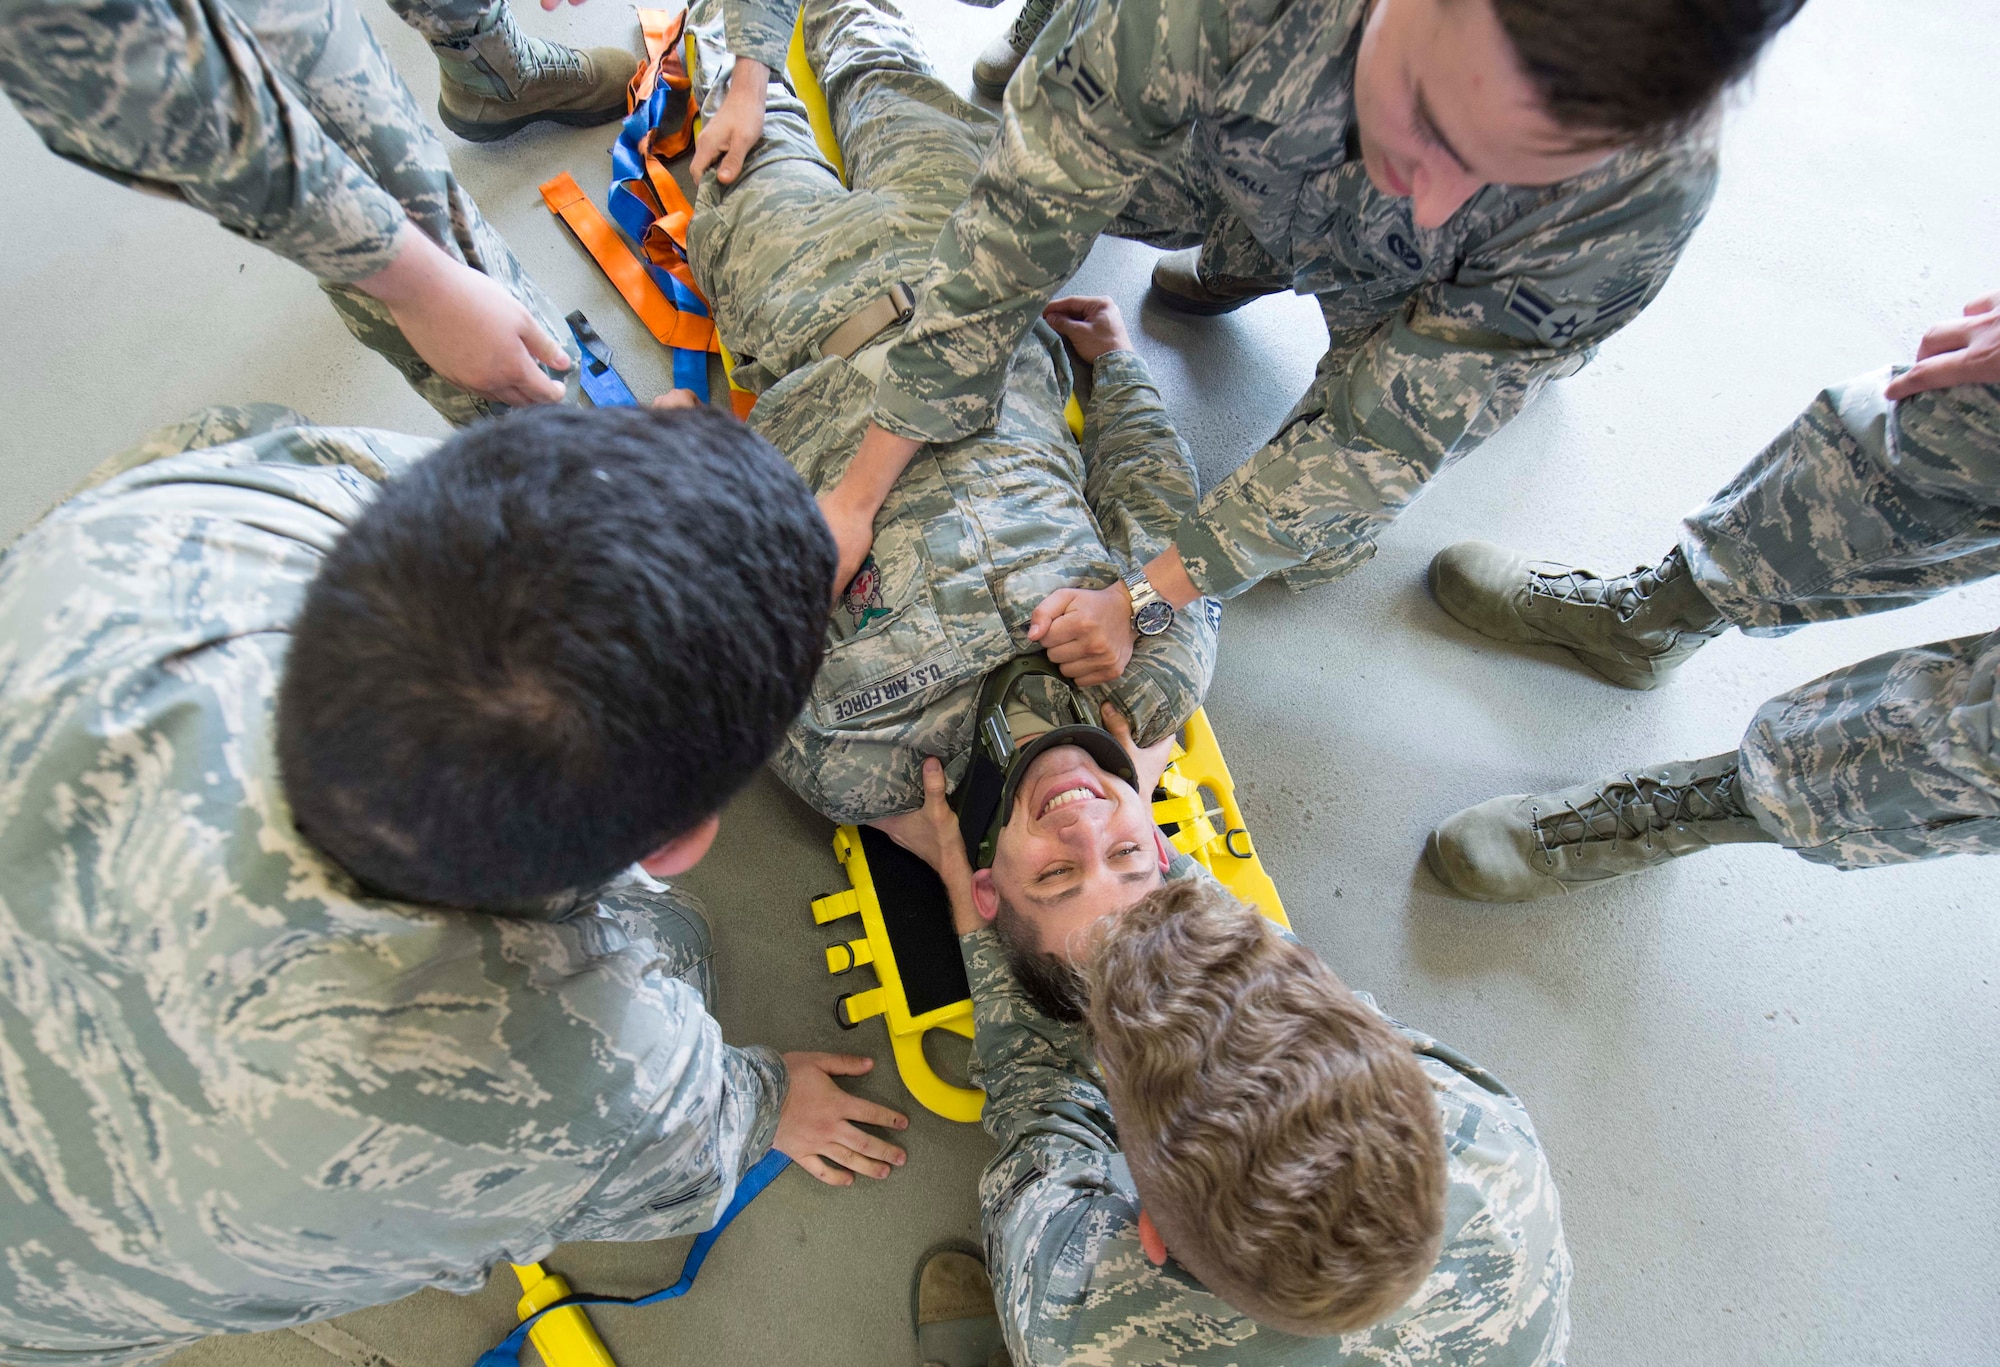 Airmen assigned to the 86th Civil Engineer Squadron Fire Emergency Services practice immobilizing and transporting a patient during an 86th CES CEF emergency responder training on Ramstein Air Base, June 25, 2018. The 86th CES CEF makes emergency responder training as realistic as possible by safely practicing on one another, thereby increasing readiness in the field. (U.S. Air Force photo by Senior Airman Elizabeth Baker)